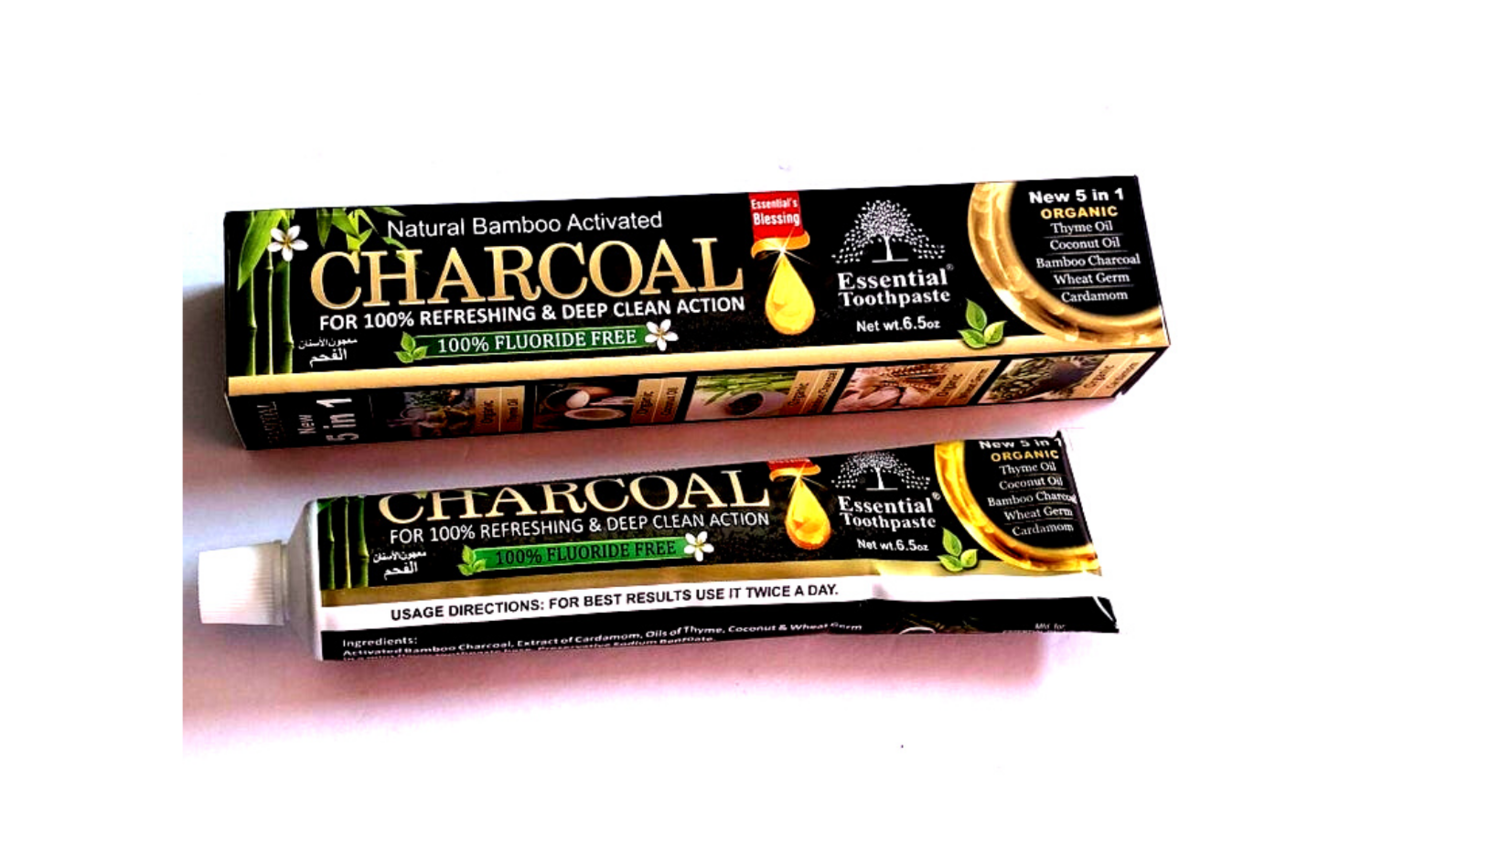 Natural Bamboo Activated Charcoal Toothpaste